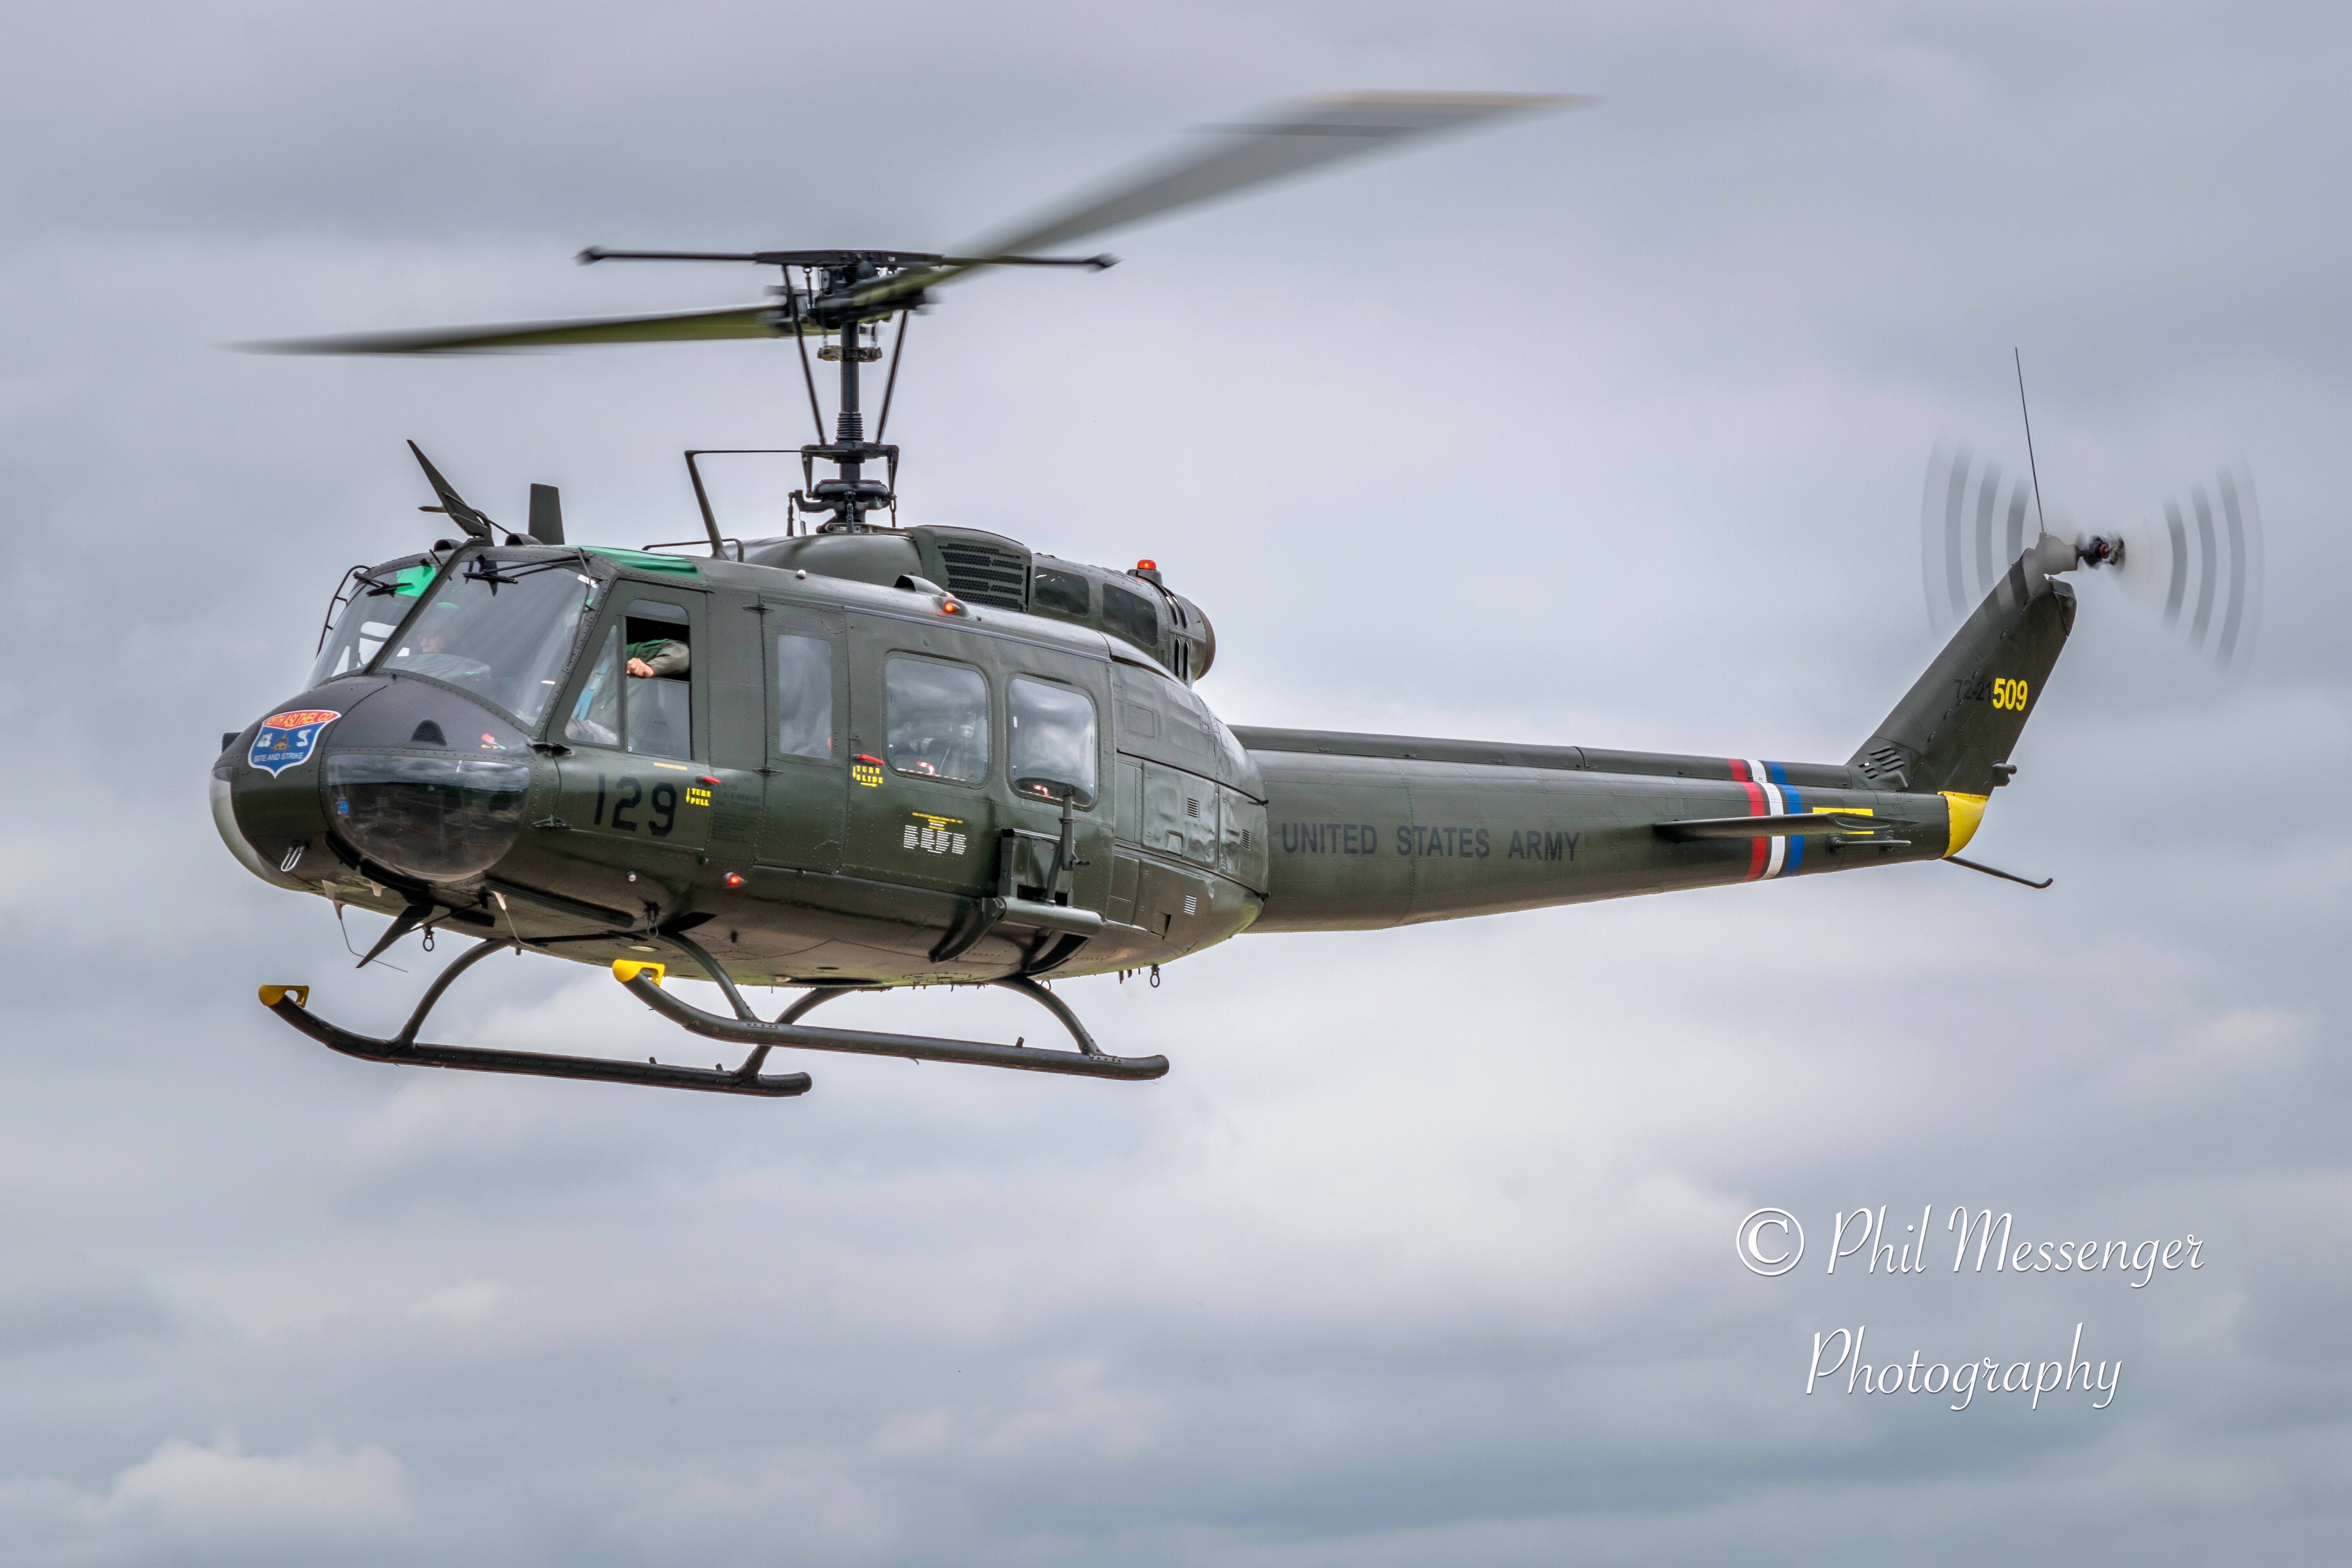 Bell UH-1H (Huey) Helicopter departing the Royal International Air Tattoo, Fairford, Gloucestershire.